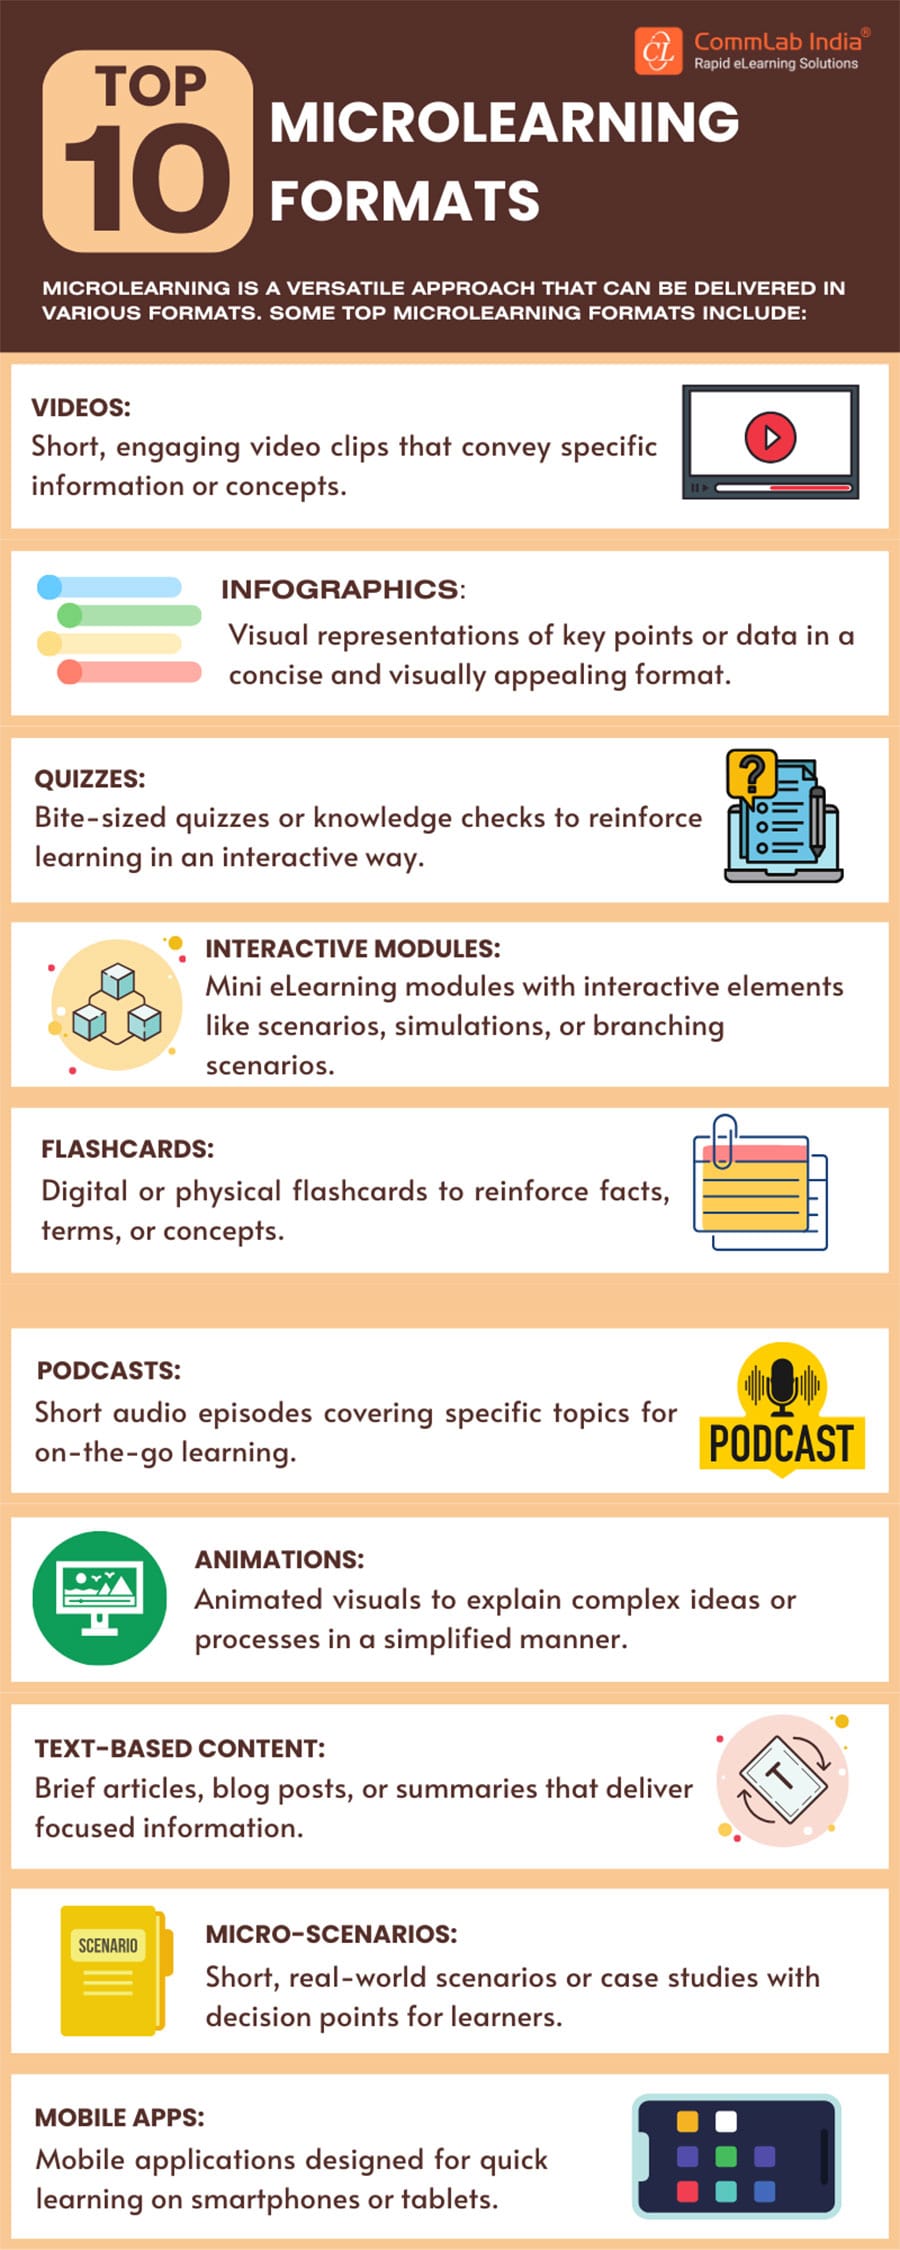  Top 10 Microlearning Formats 